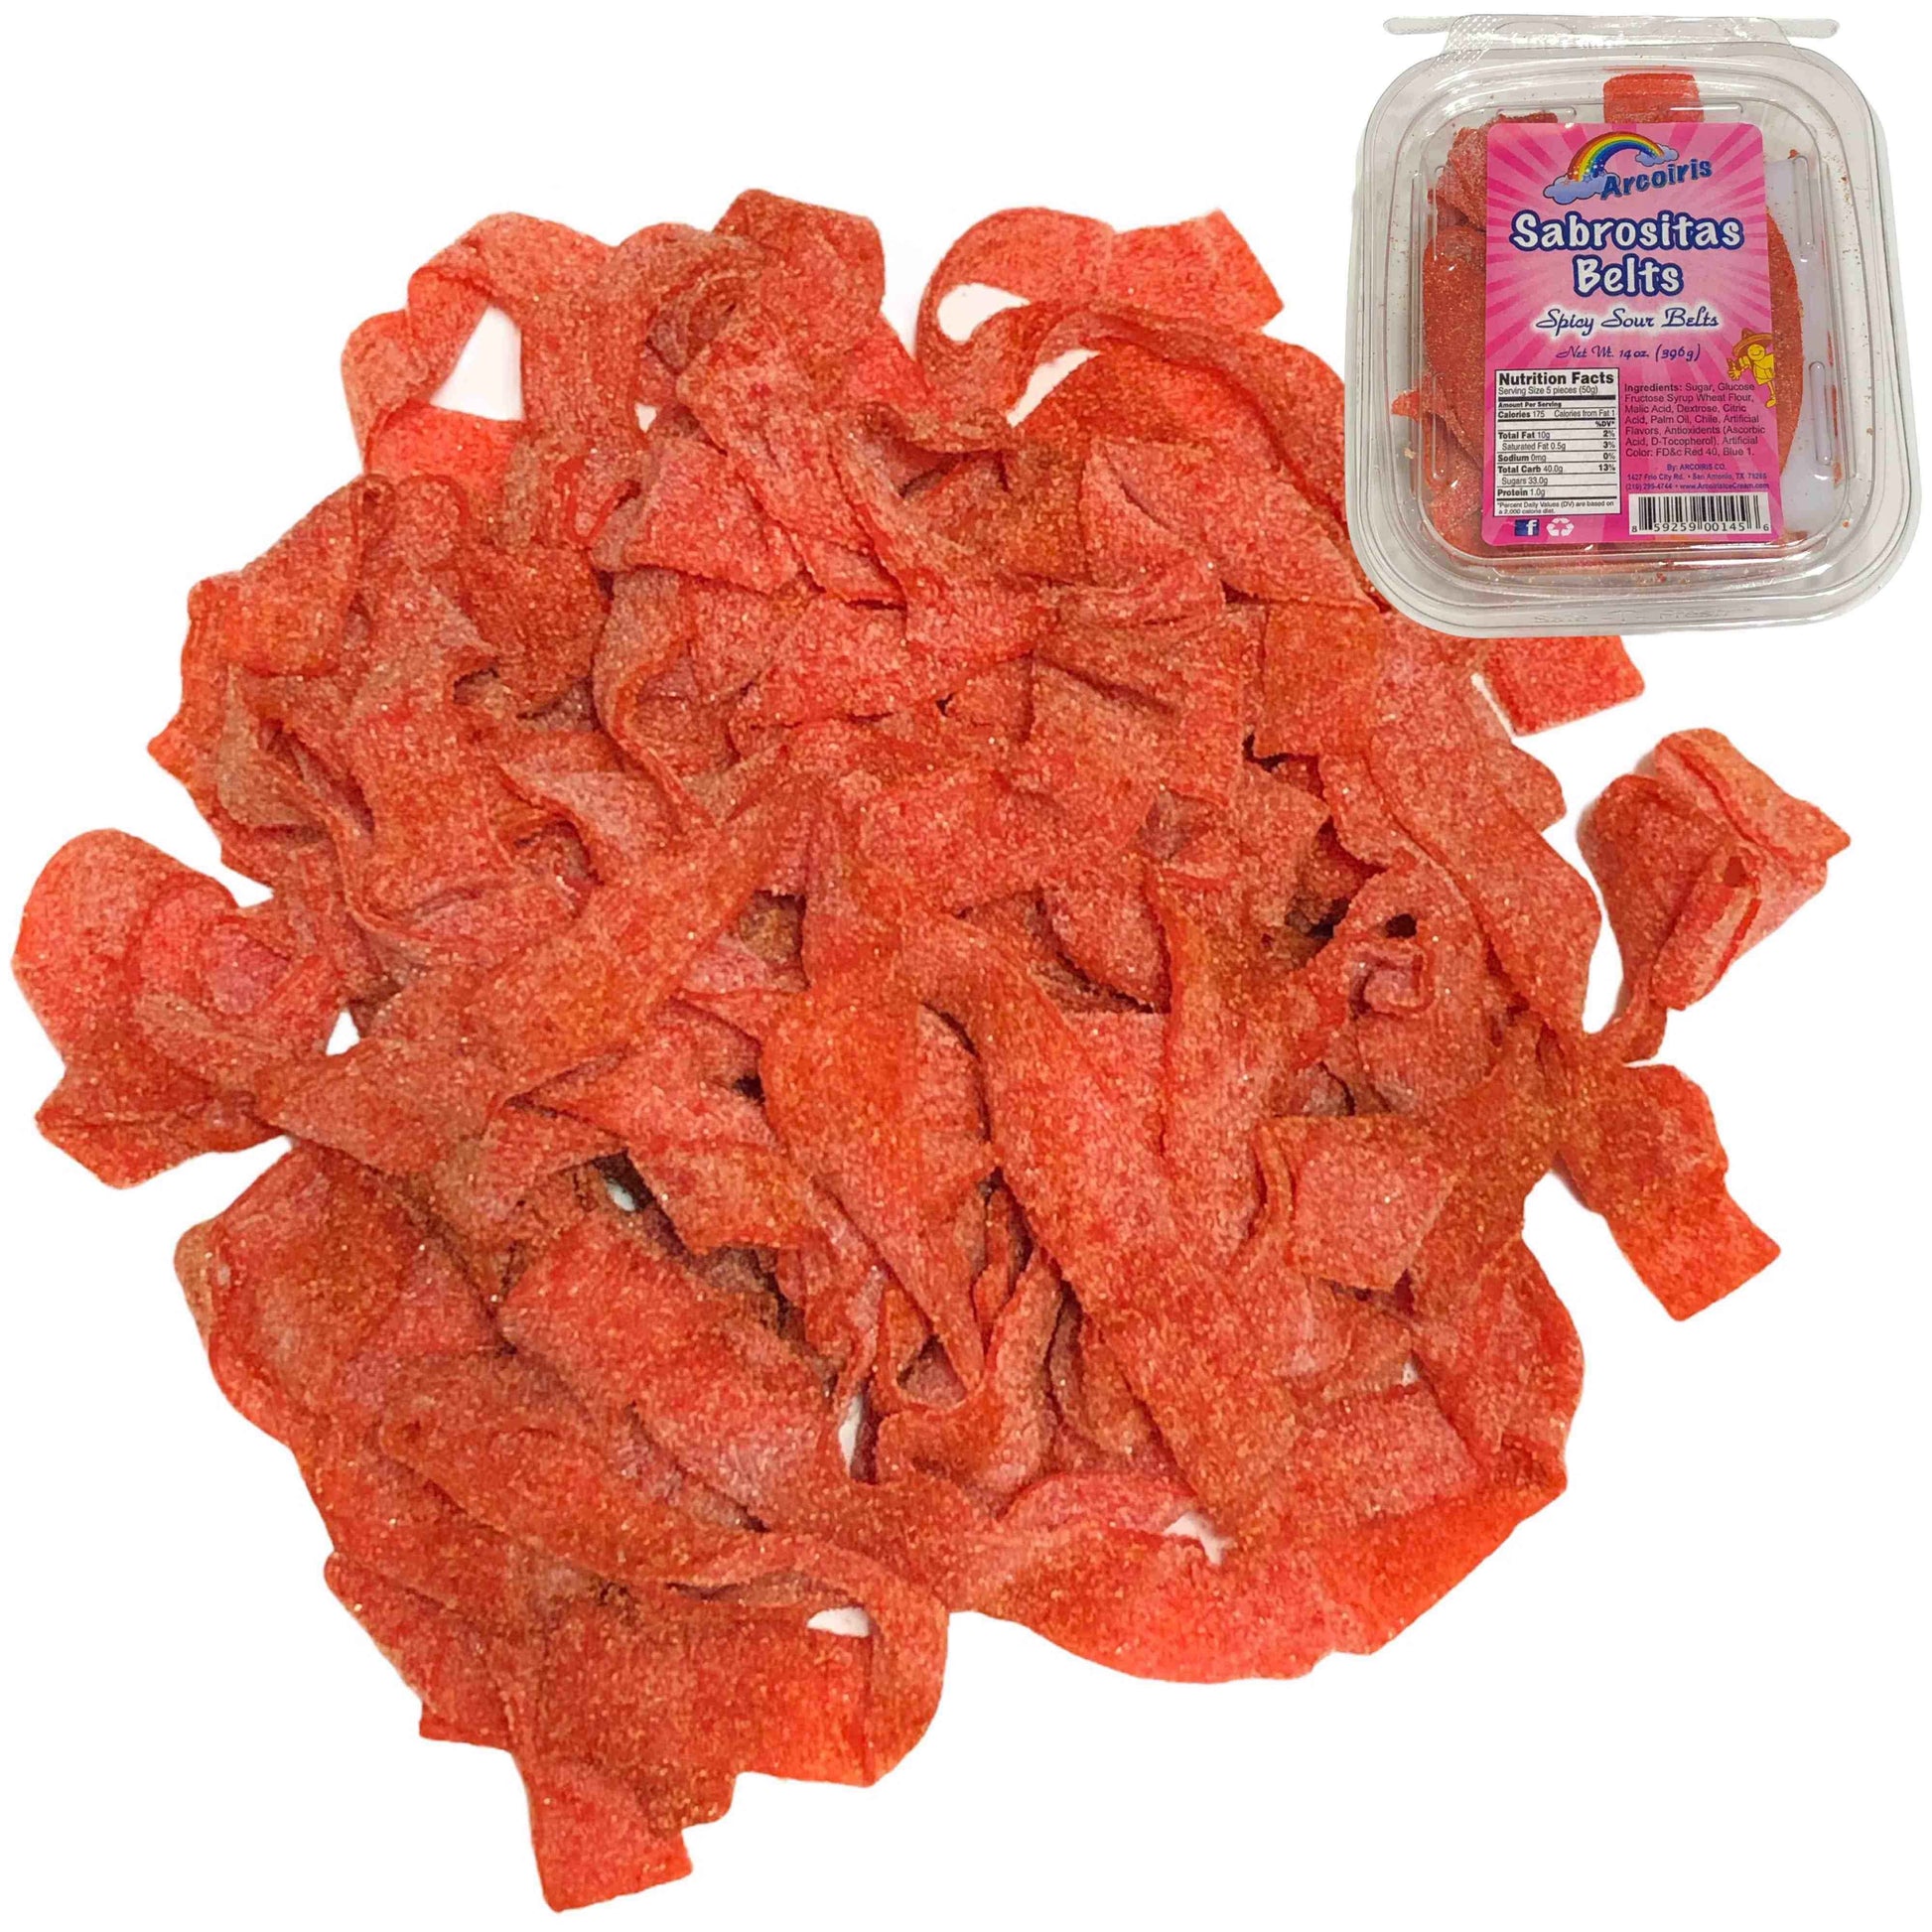 Sabrositas Belts - Strawberry Sour Belts with Chile Powder - 14 oz - ChamoyDreams